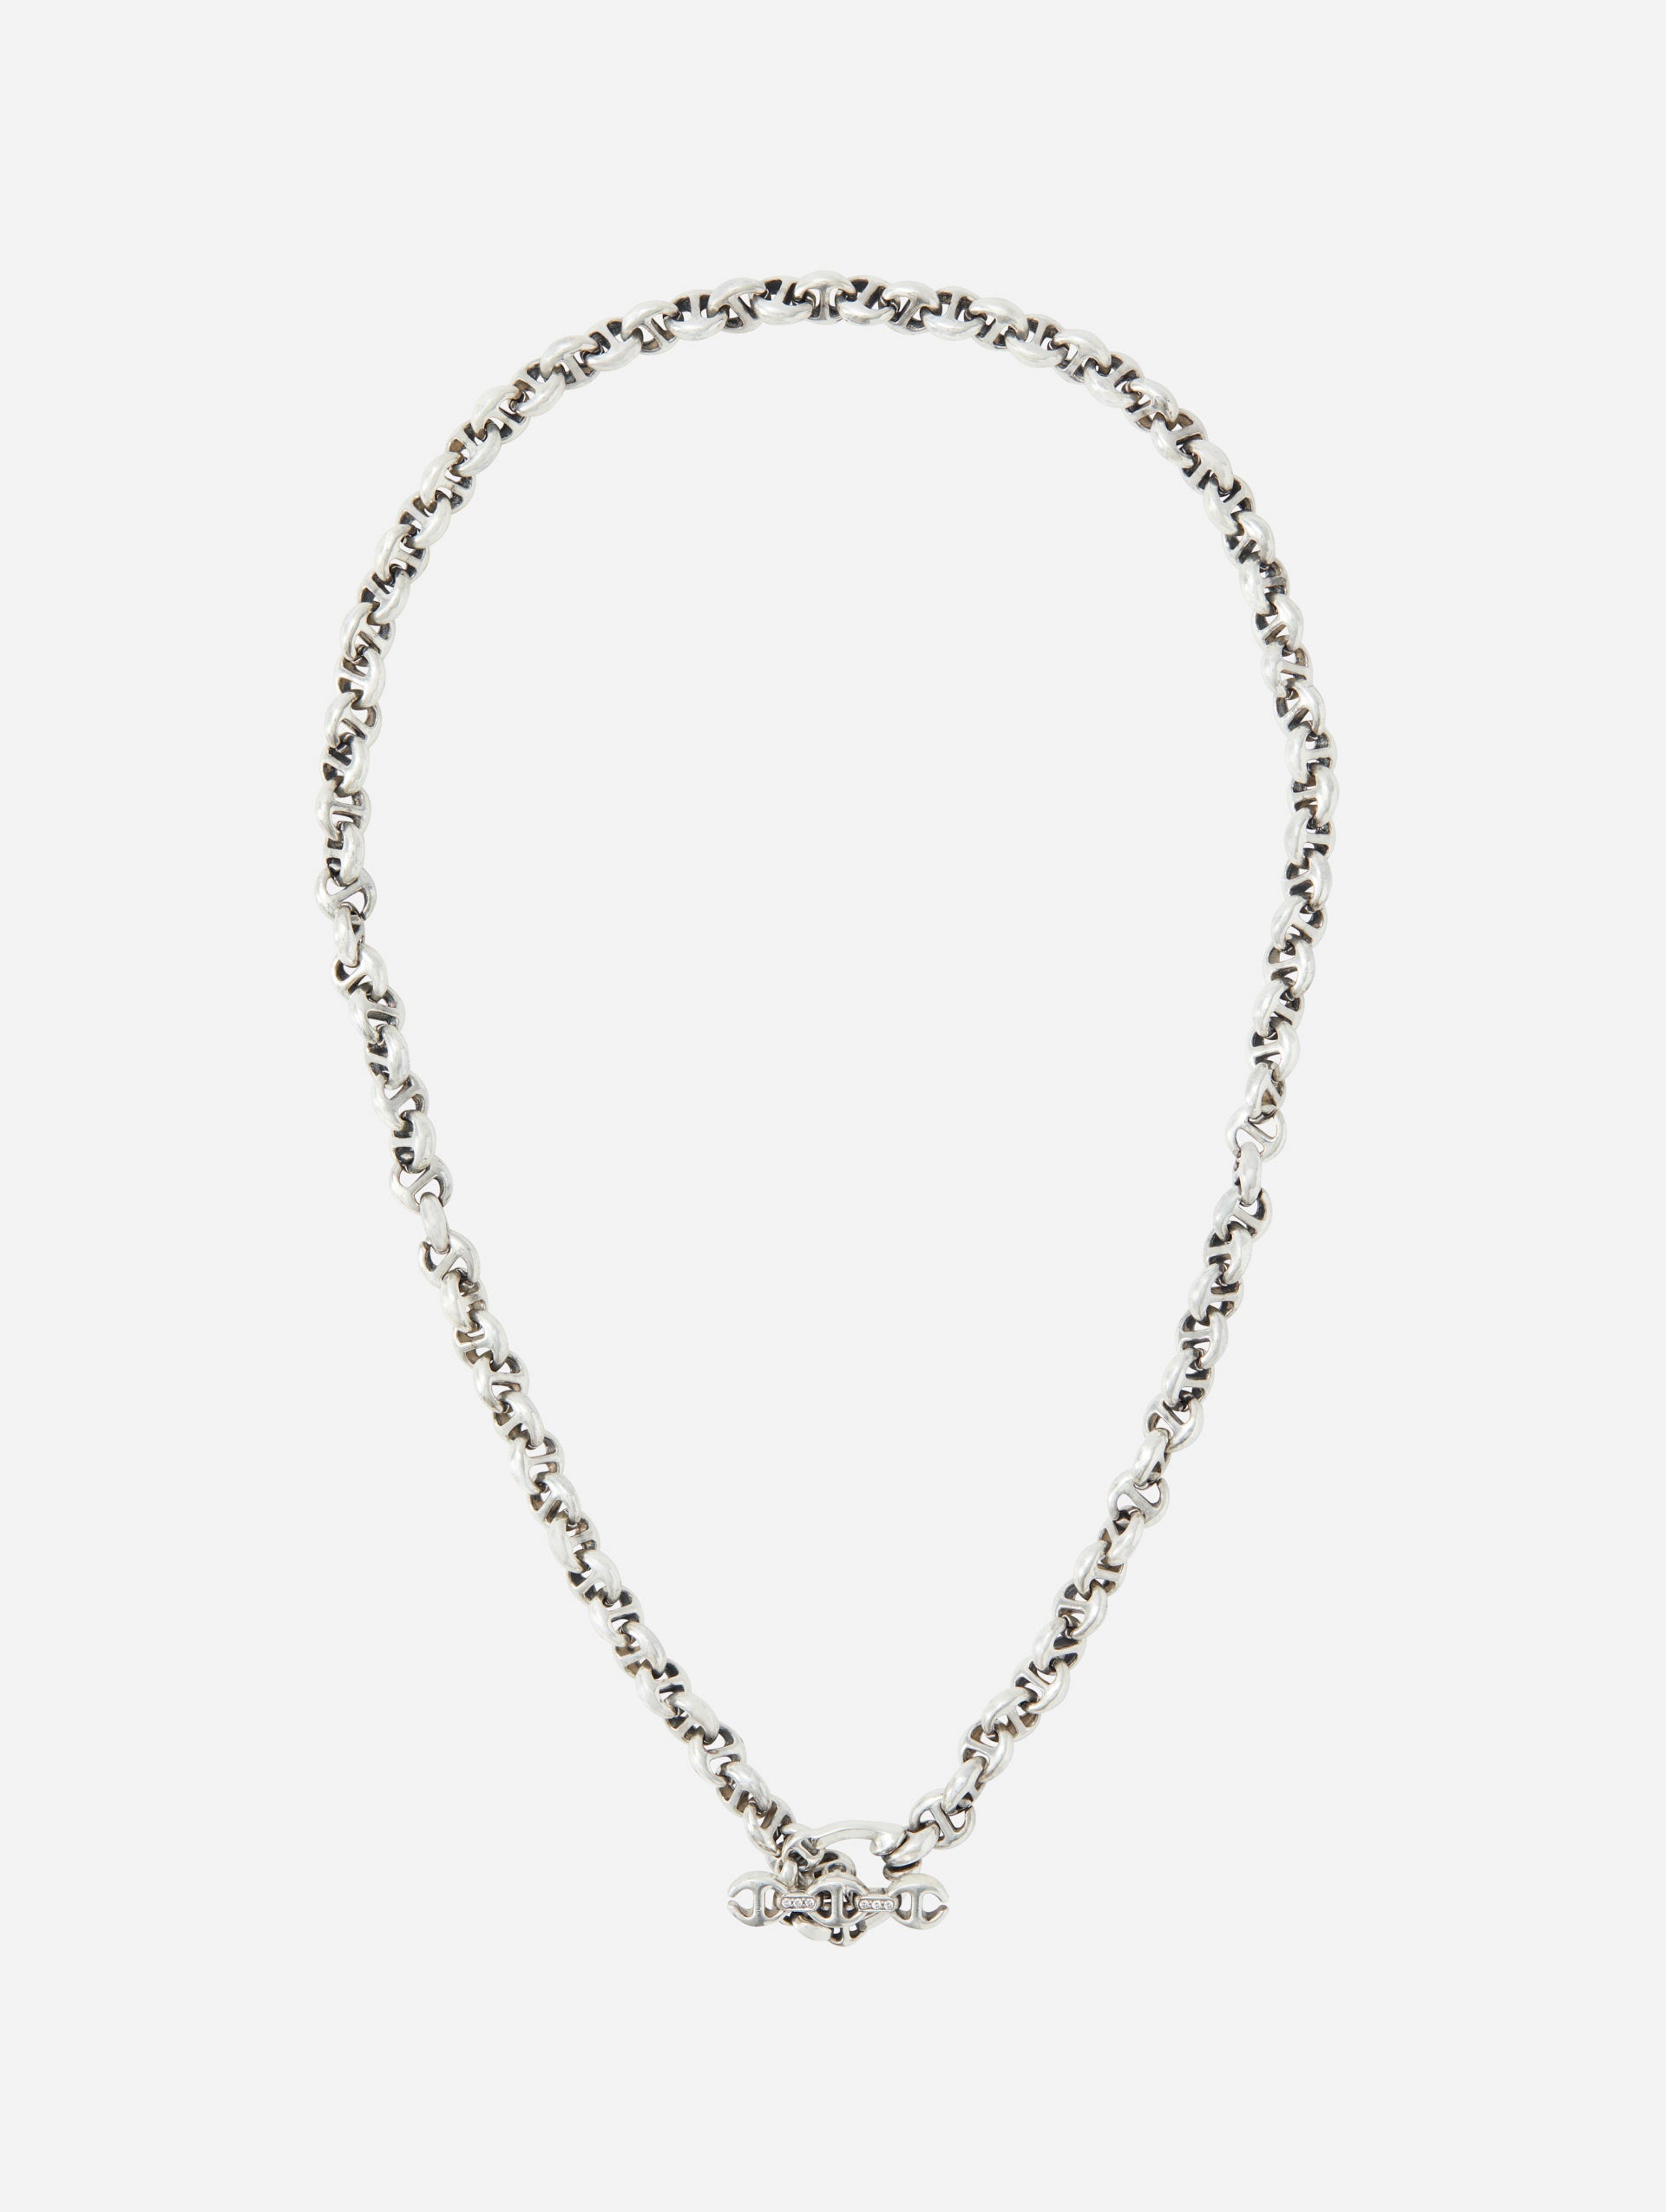 5mm Open Link Necklace With Diamond Toggle | HOORSENBUHS 